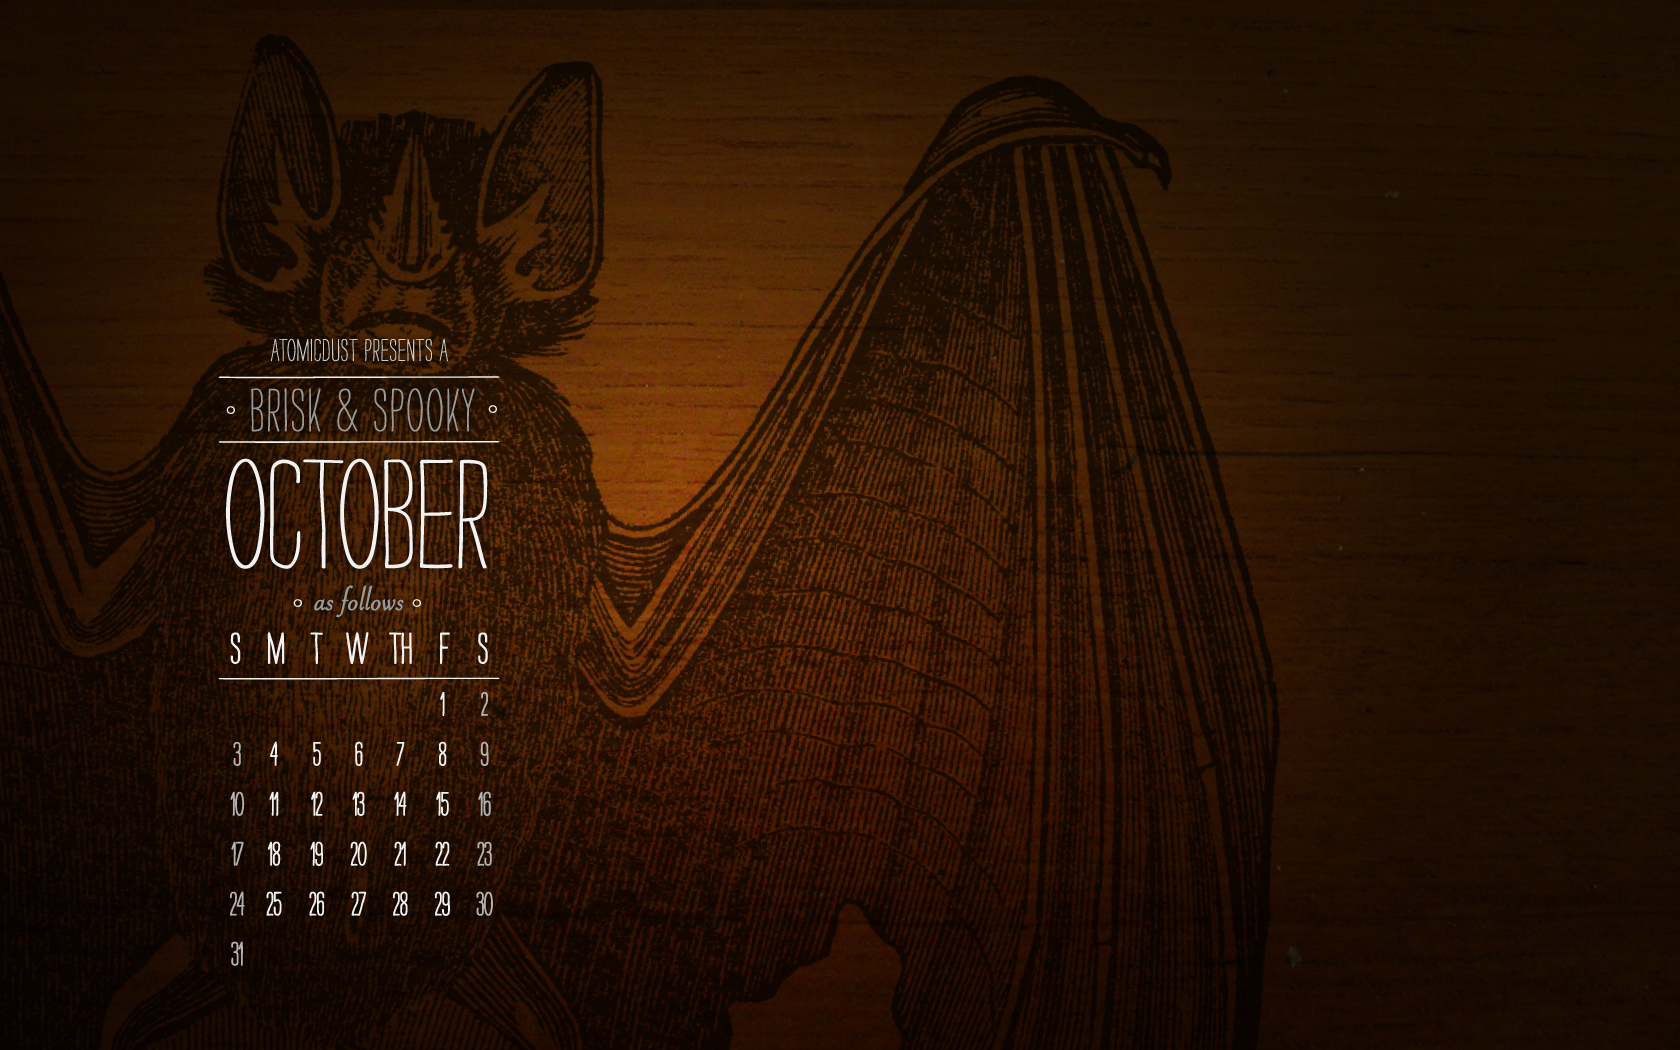 October with Custom Wallpapers by Atomicdust